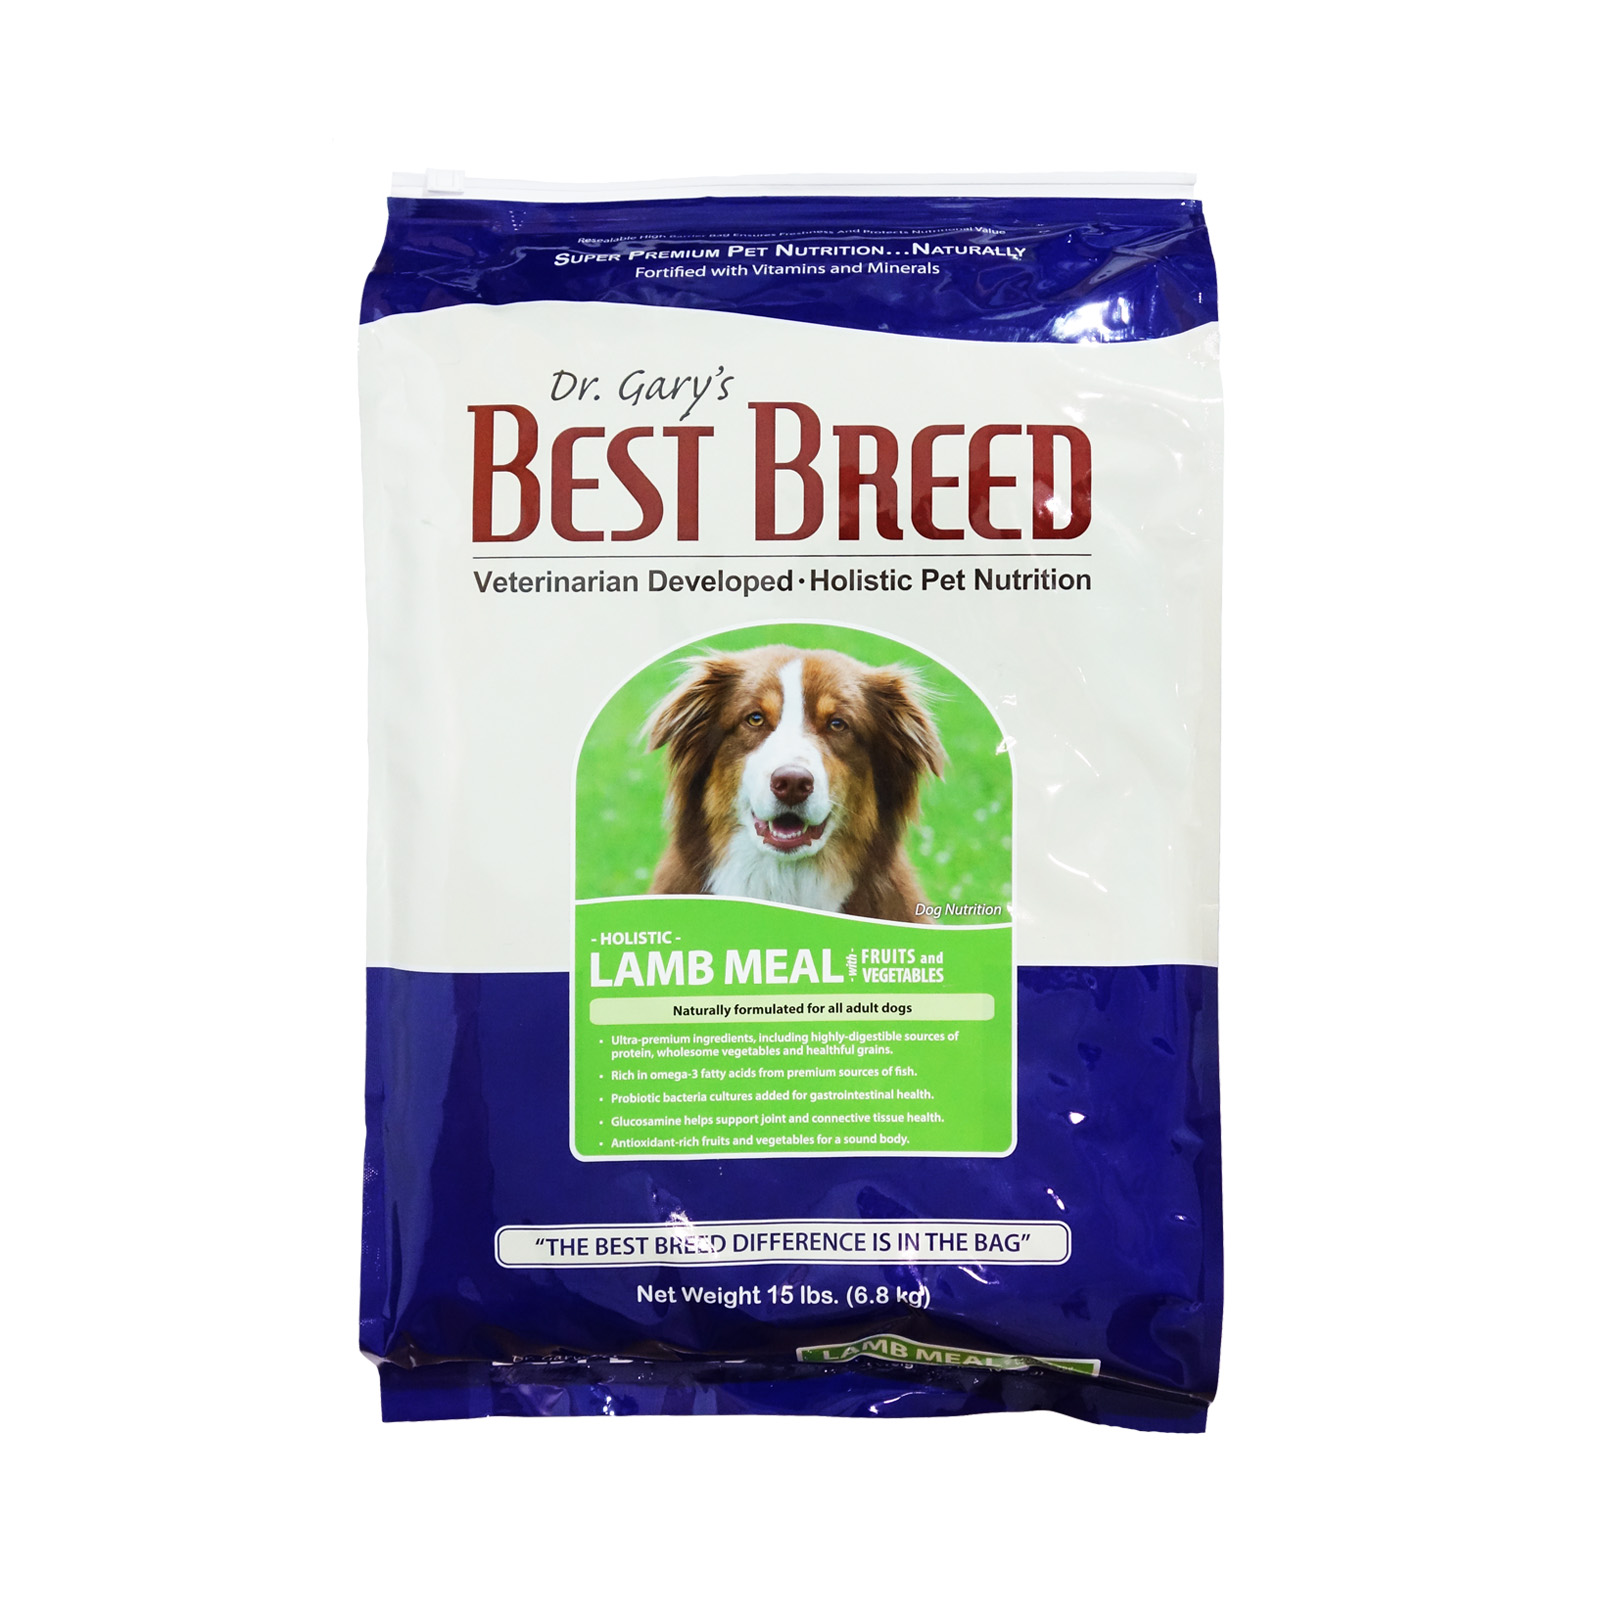 Dr. Gary's Best Breed Holistic Lamb Meal with Fruits & Vegetables Adult Dog Dry Food 15lbs (6.8Kg)